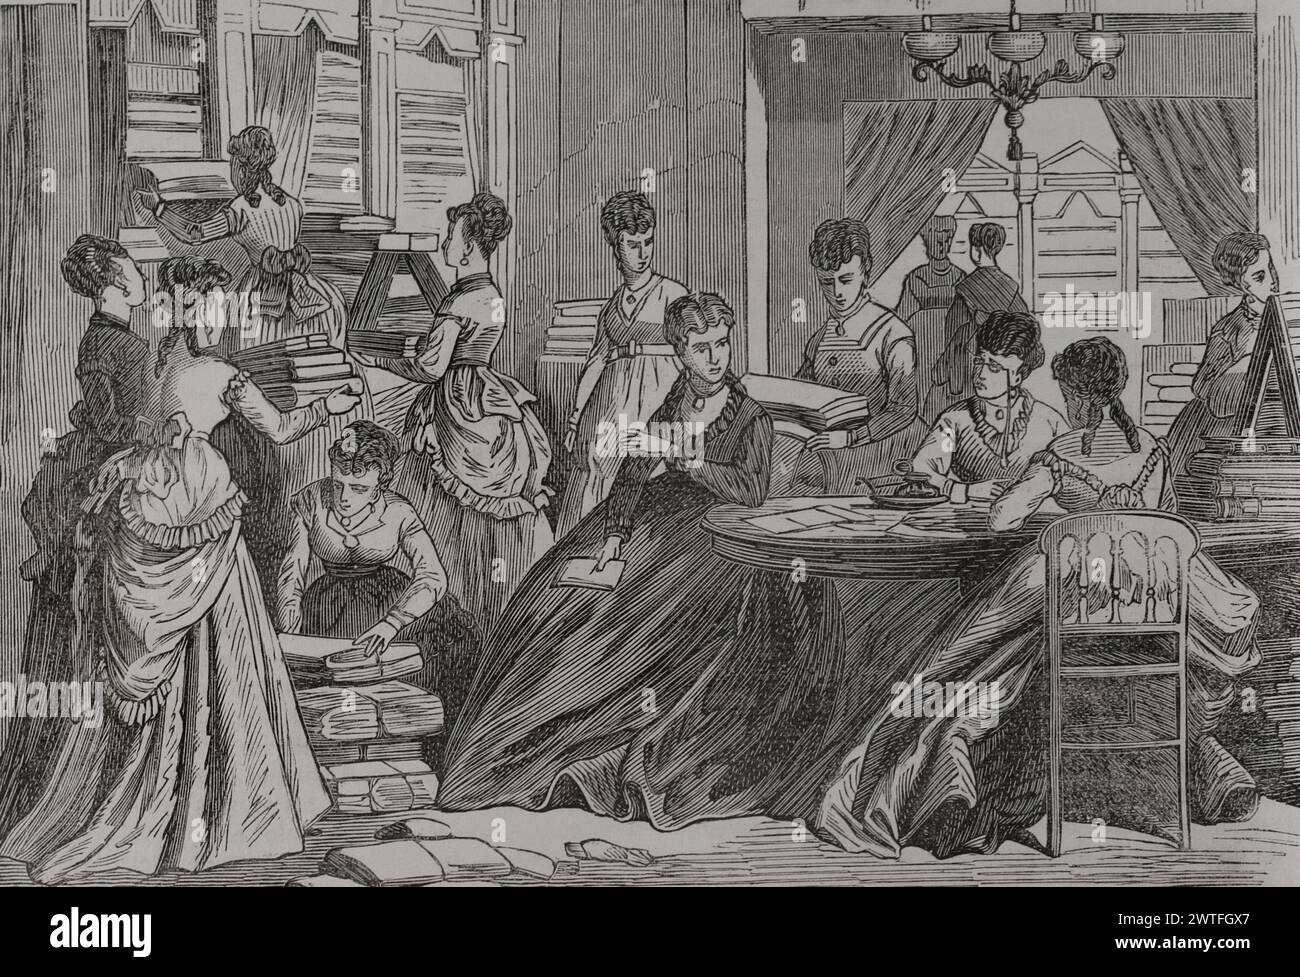 Franco-Prussian War (1870-1871). Stuttgart ladies' committee collecting goods for the war wounded. Engraving. 'Historia de la Guerra de Francia y Prusia' (History of the War between France and Prussia). Volume II. Published in Barcelona, 1871. Stock Photo